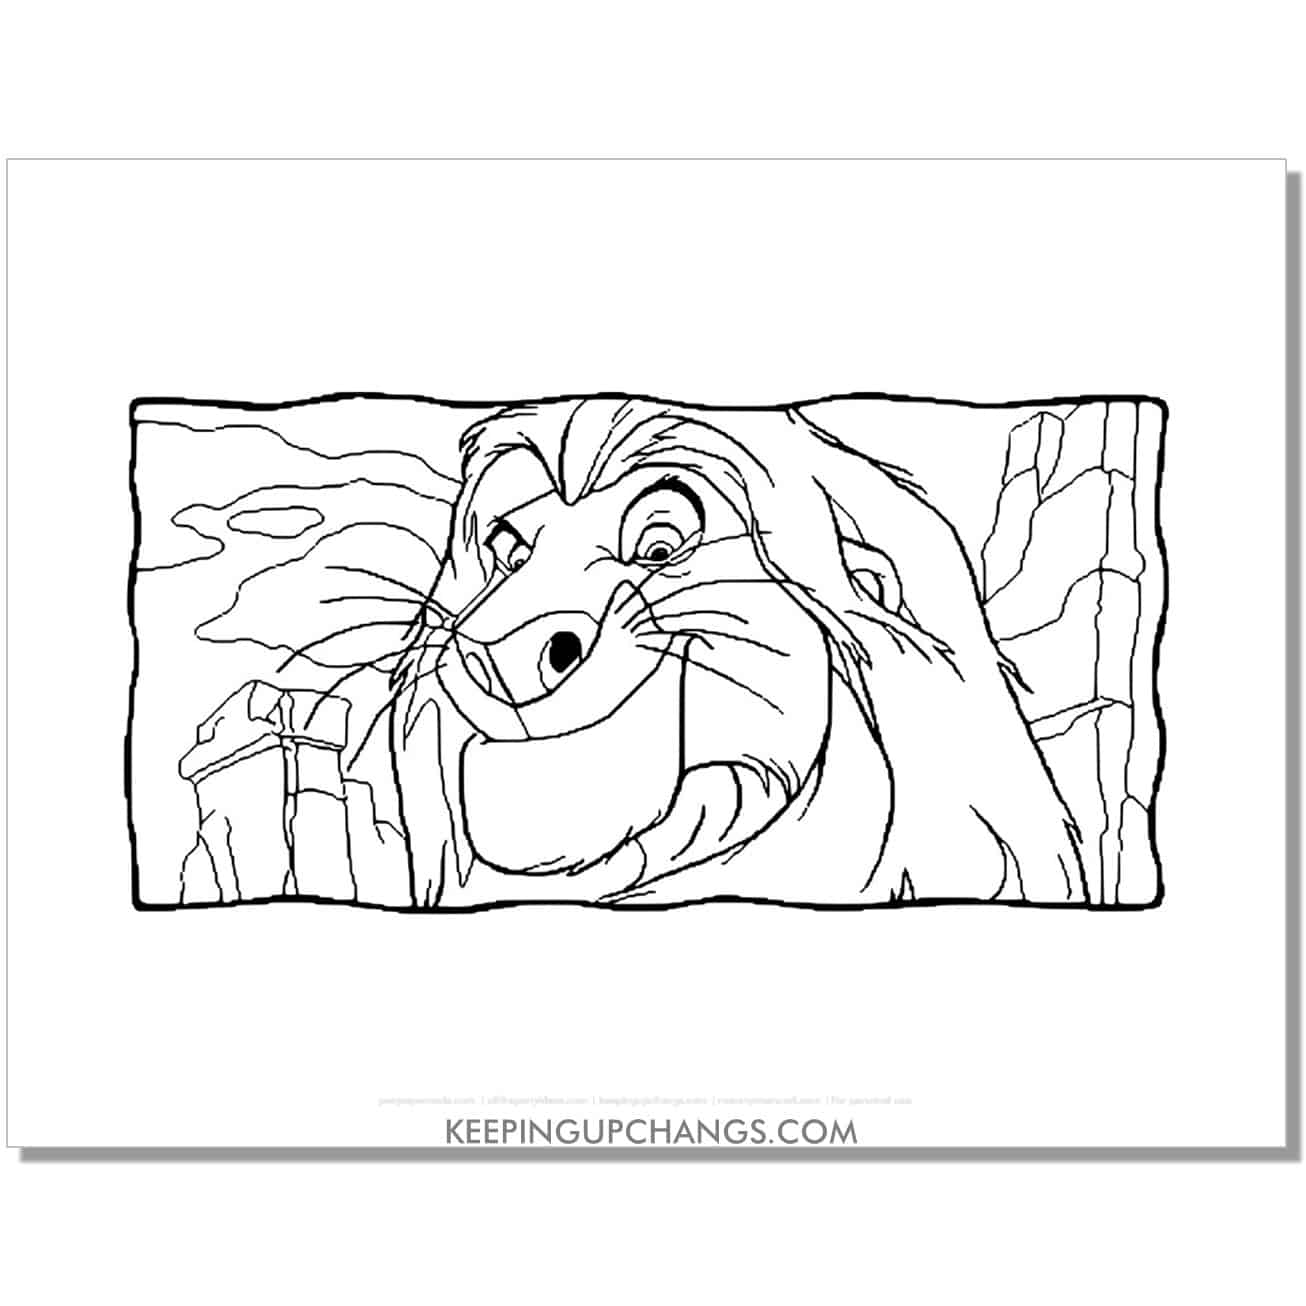 close up of mufasa movie scene lion king coloring page, sheet.